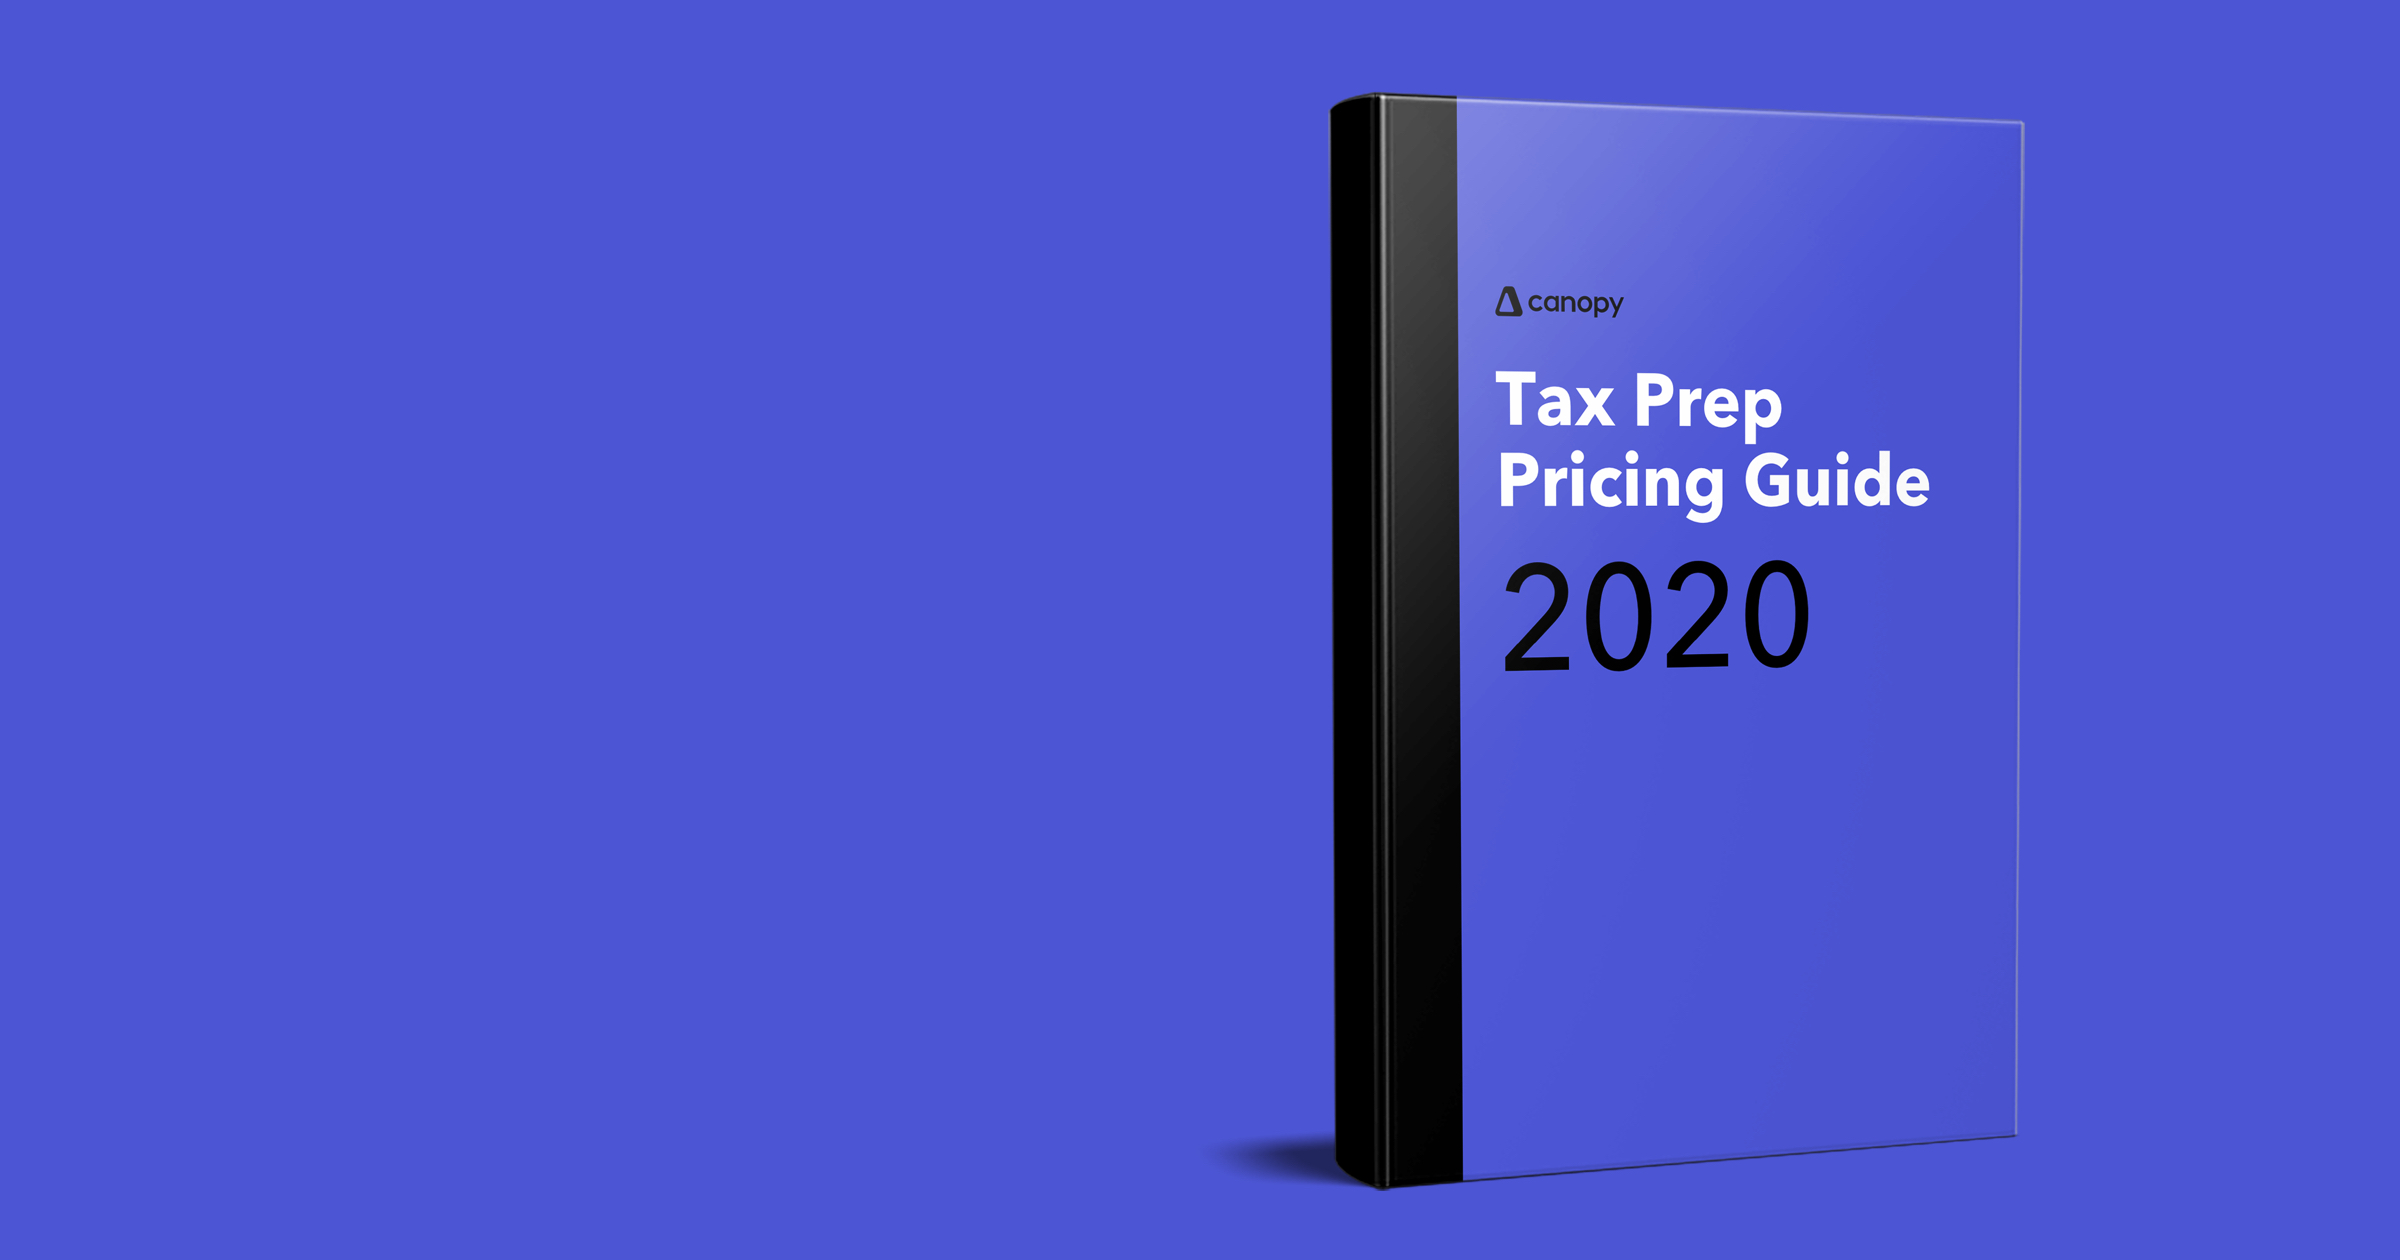 How Tax Firms Are Pricing Their Tax Preparation Services in 2020